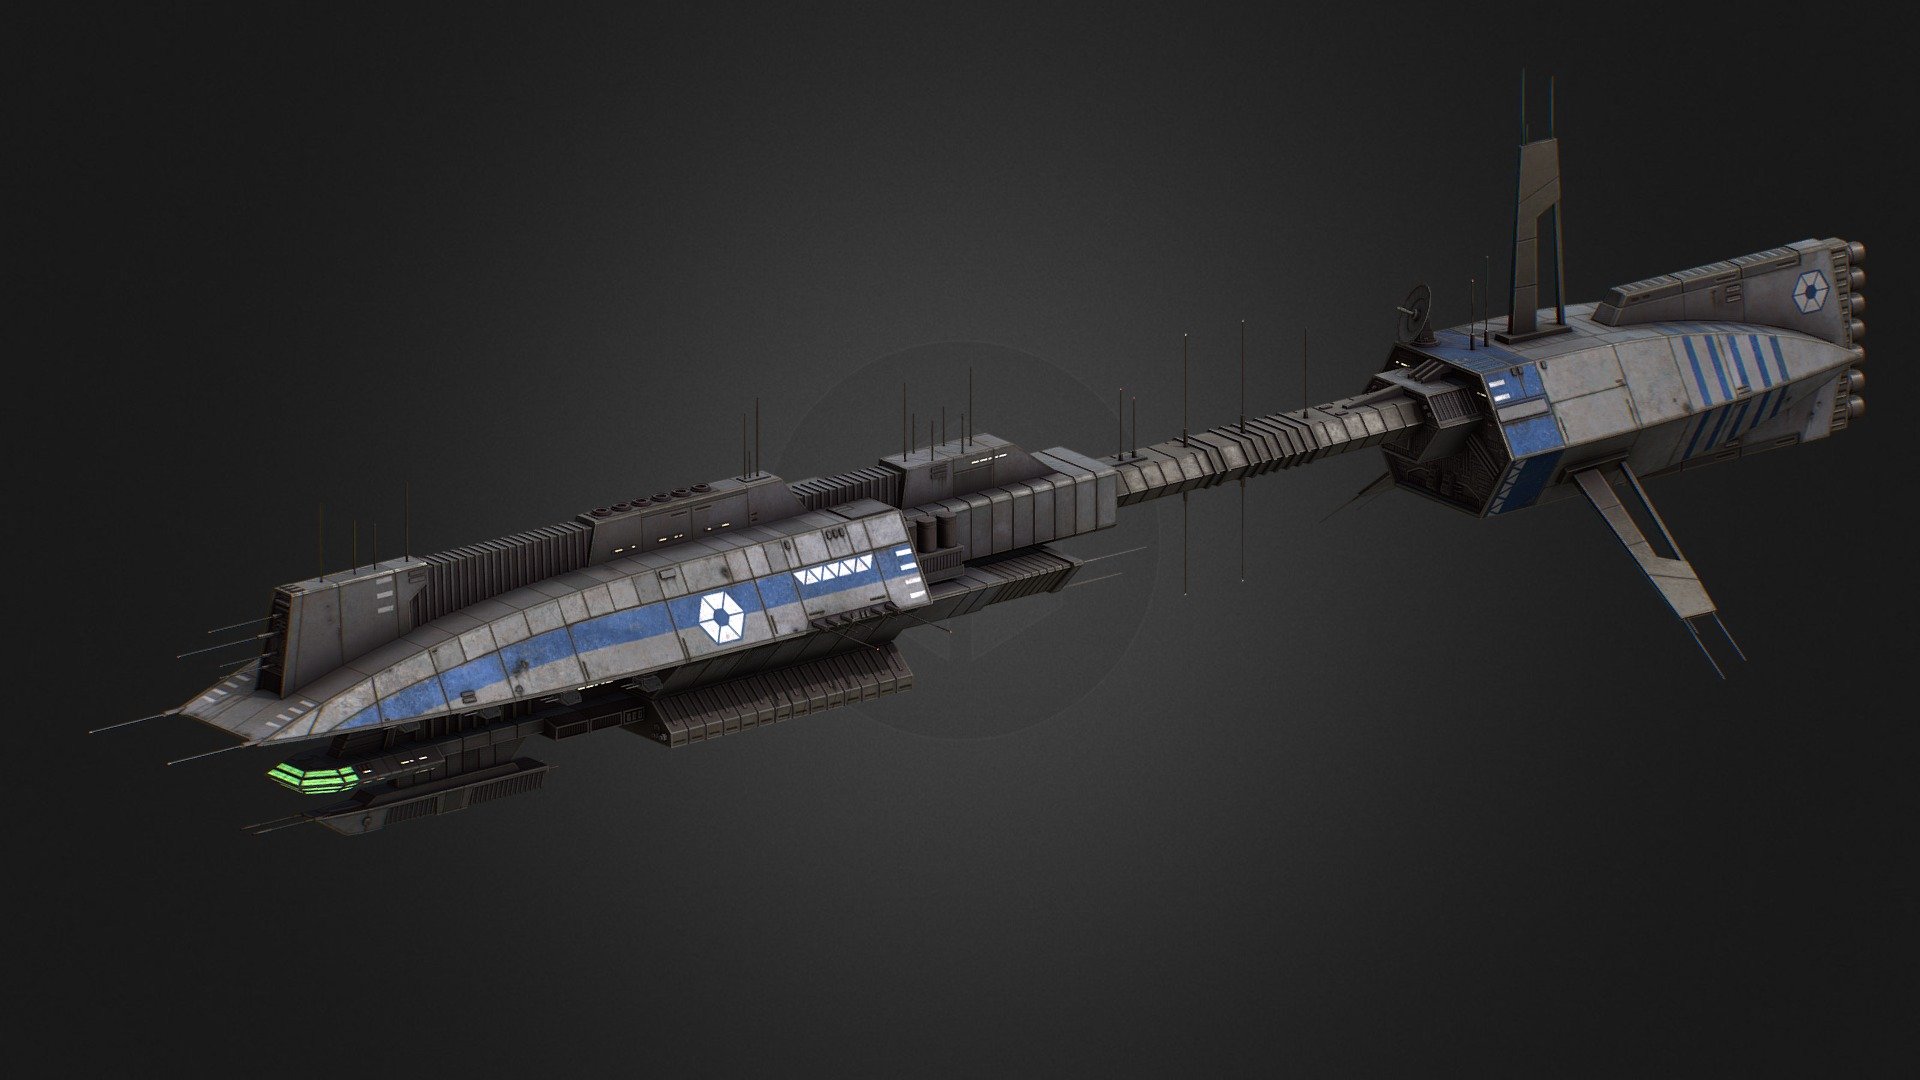 The Overseer Class Light Cruiser was produced at the Hoersch-Kessel Driveworks during the later stages of the Old Republic. These vessel's were deployed by the Commerce Guild during the Clone Wars as patrol, escort and commerce raiders, employing their large communication and sensor masts to track and intercept targets of opportunity. 

These 900 meter vessels were typically armed with a Dual Heavy Ion Cannon emplacement underslung on the forward hull as well as 8 dual multipurpose turbolaser batteries and 6 missile tubes placed in an array along the upper hull. 

• She’ll be available for digital download during the month of AUG on my Patreon!
https://www.patreon.com/Kharak

• Checkout my other work: https://linktr.ee/dominion_of_kharak - Commerce Guild Light Cruiser Patreon Release! - Buy Royalty Free 3D model by Kharak 3d model